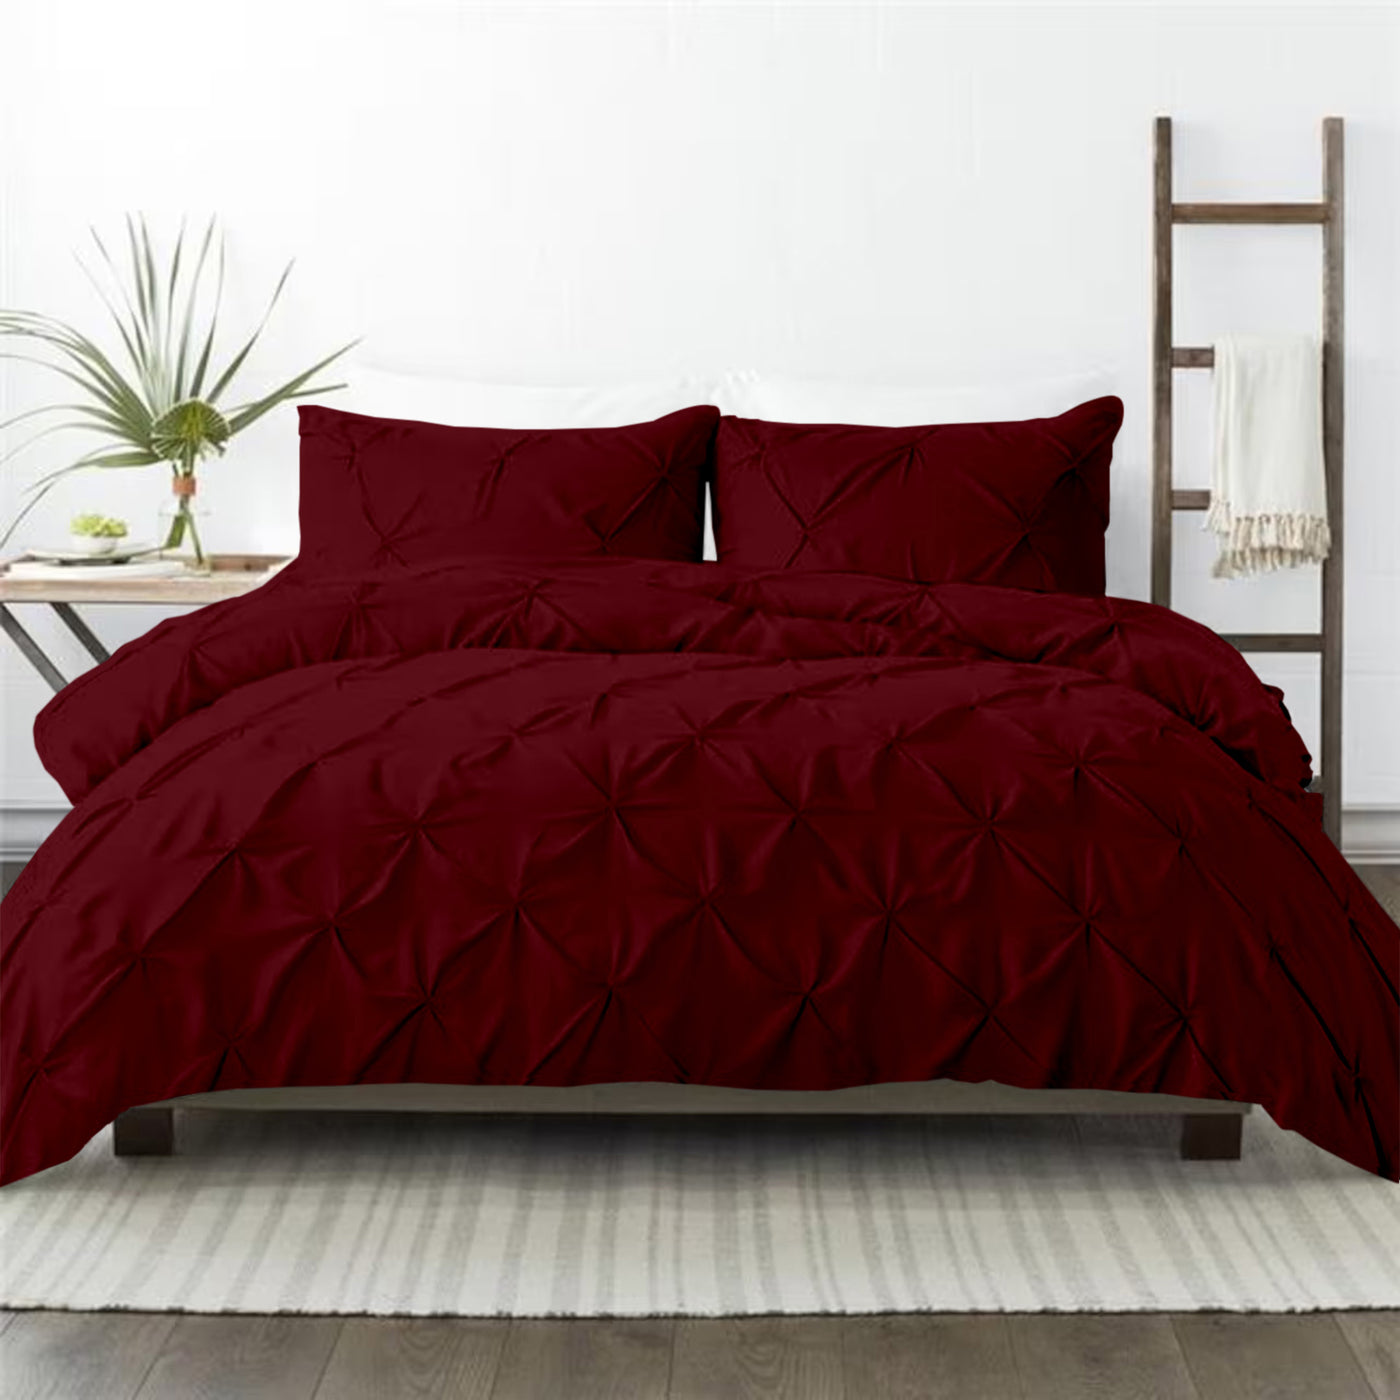 Pinch Pleated Down Alternative Quilt 300 TC Egyptian Cotton Exterior With 2 Pillow Covers - Burgundy